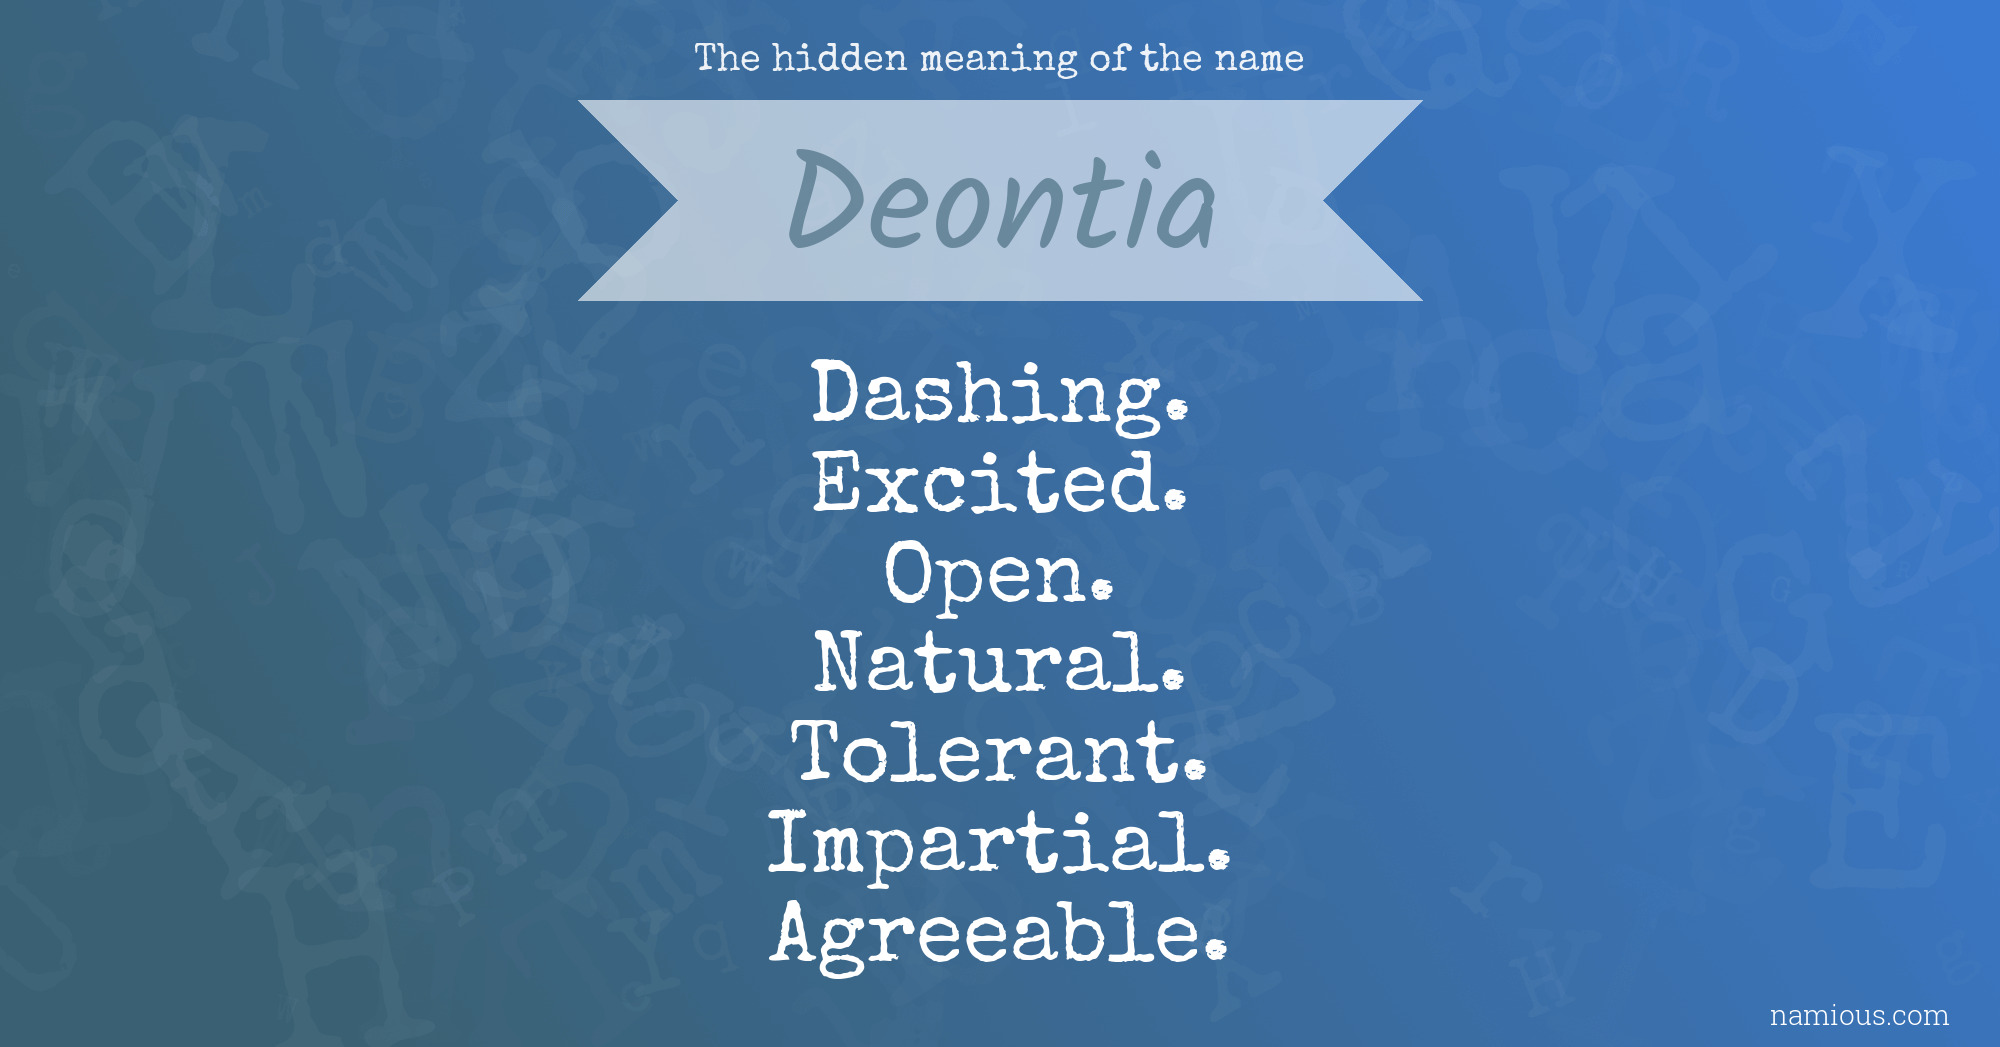 The hidden meaning of the name Deontia